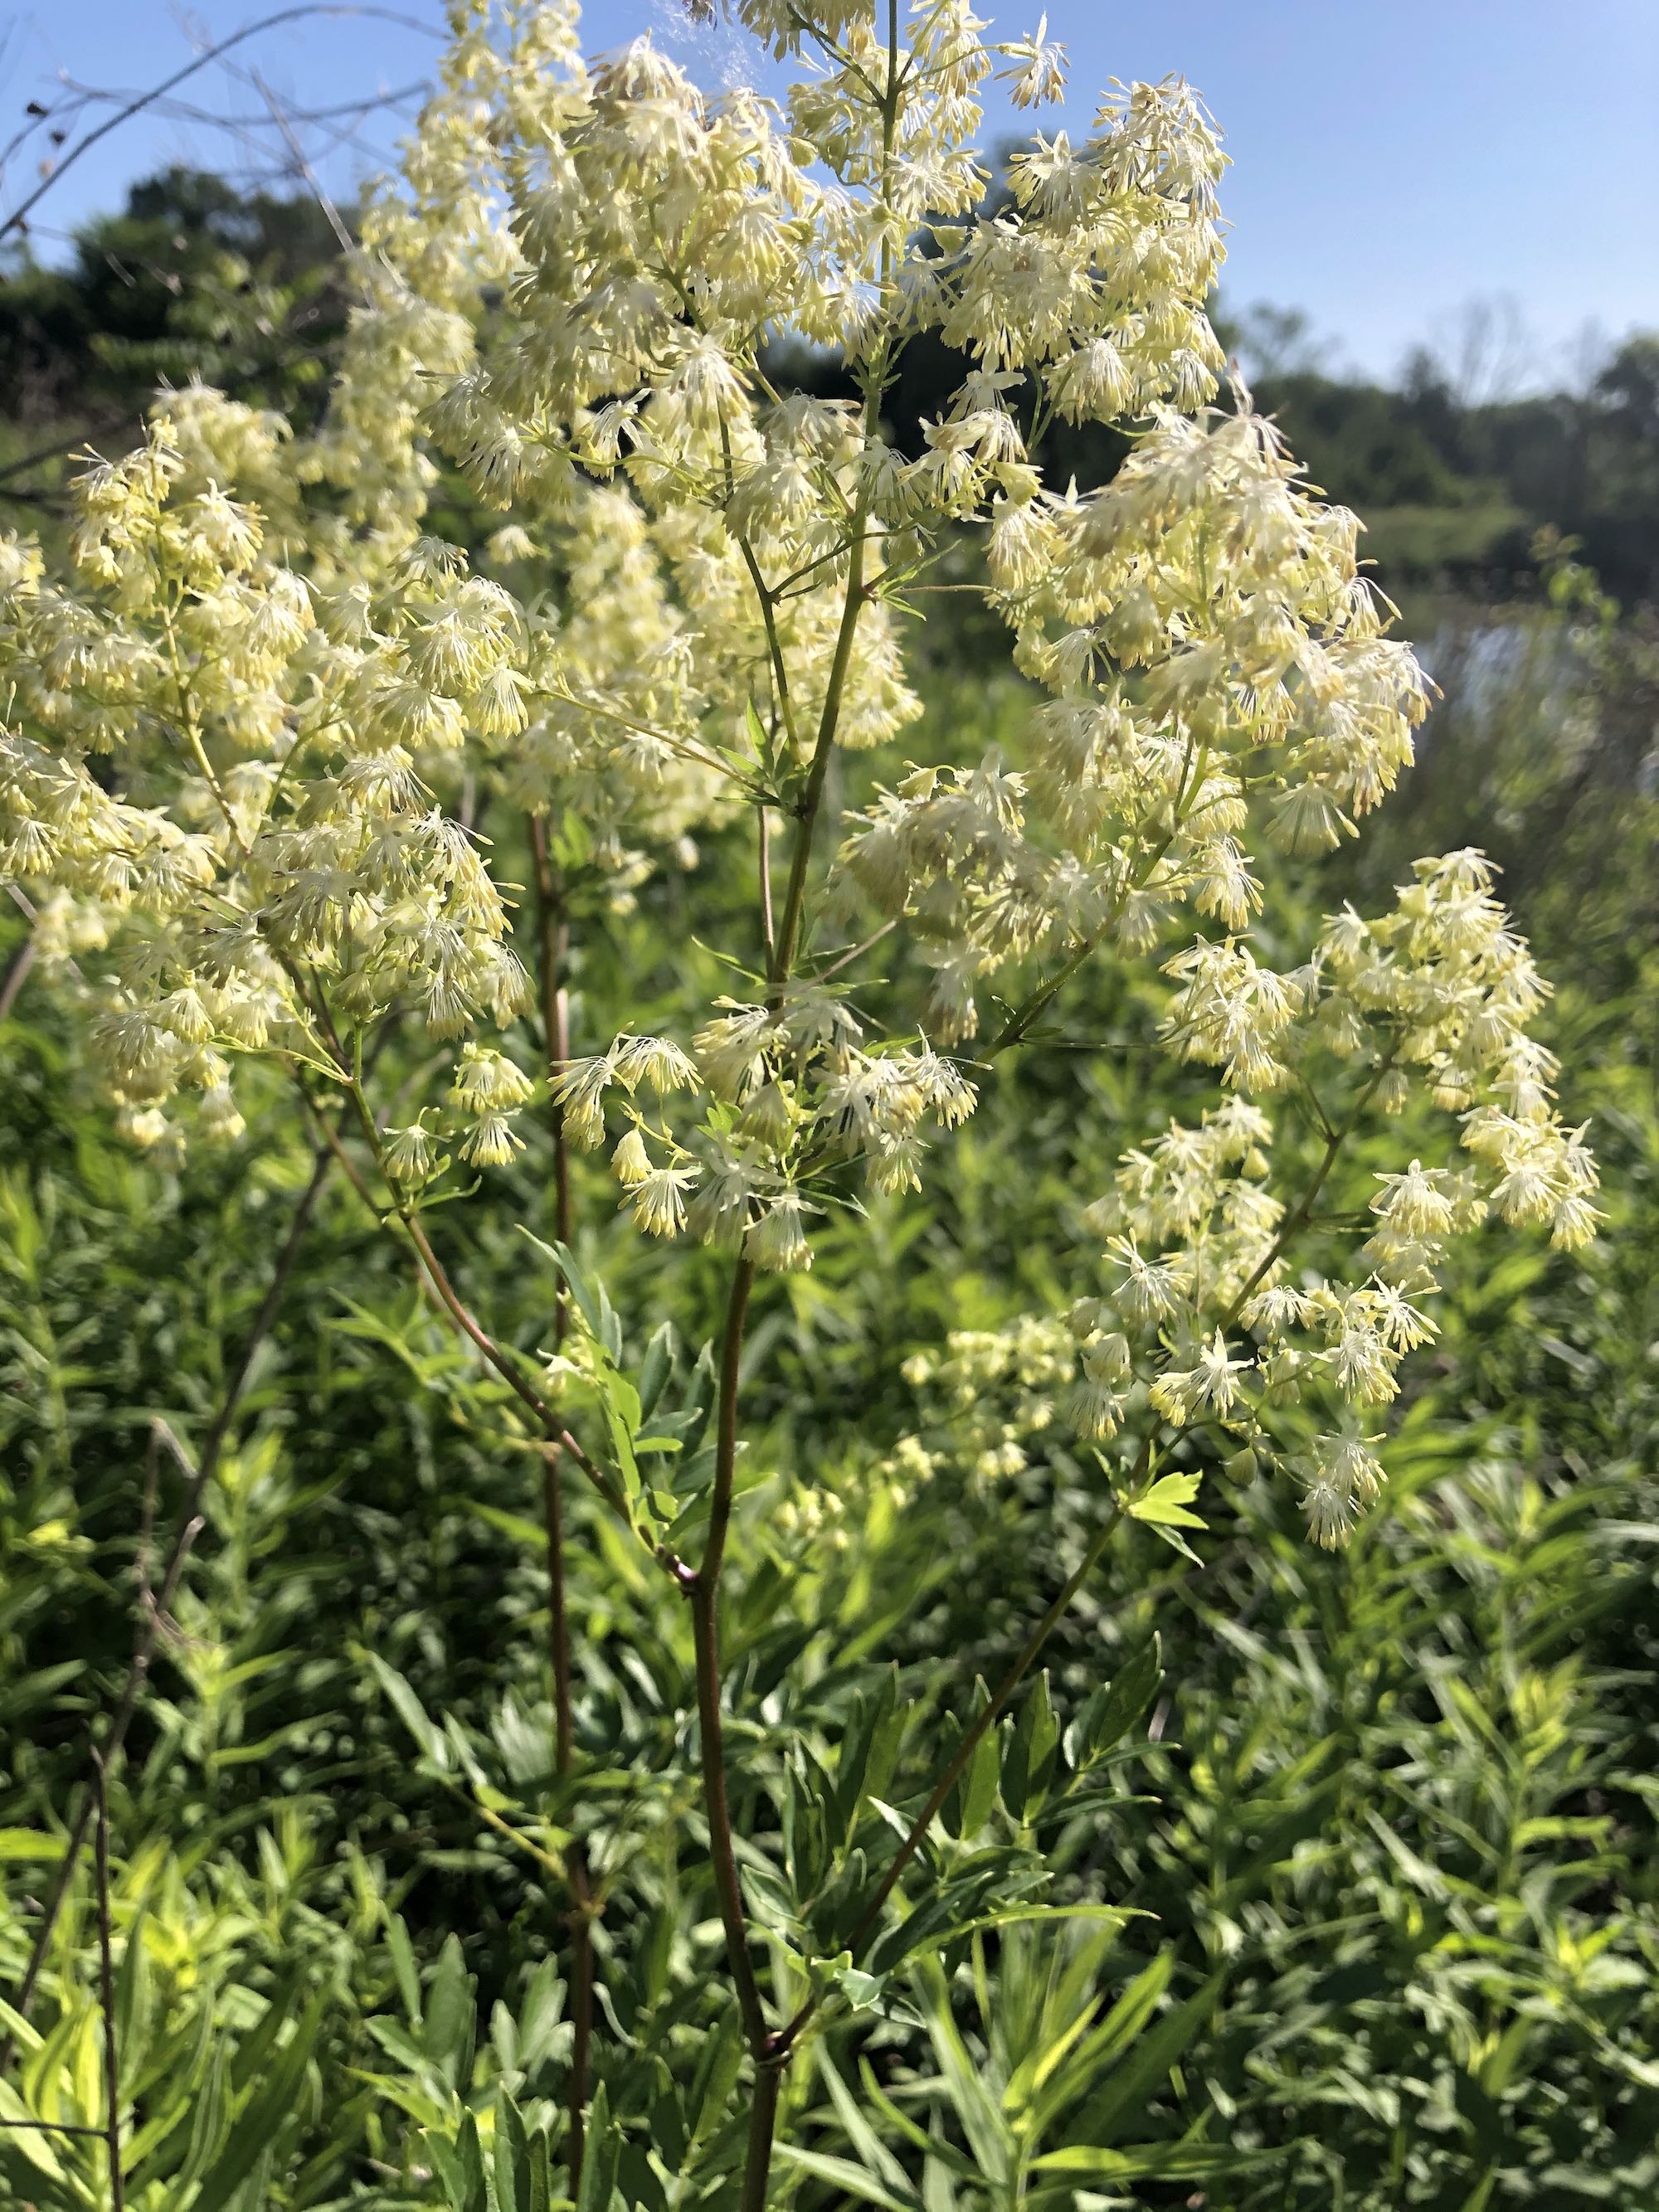 Tall Meadow-rue on shore of Retaining Pond in Madison, Wisconsin on June 14, 2020.